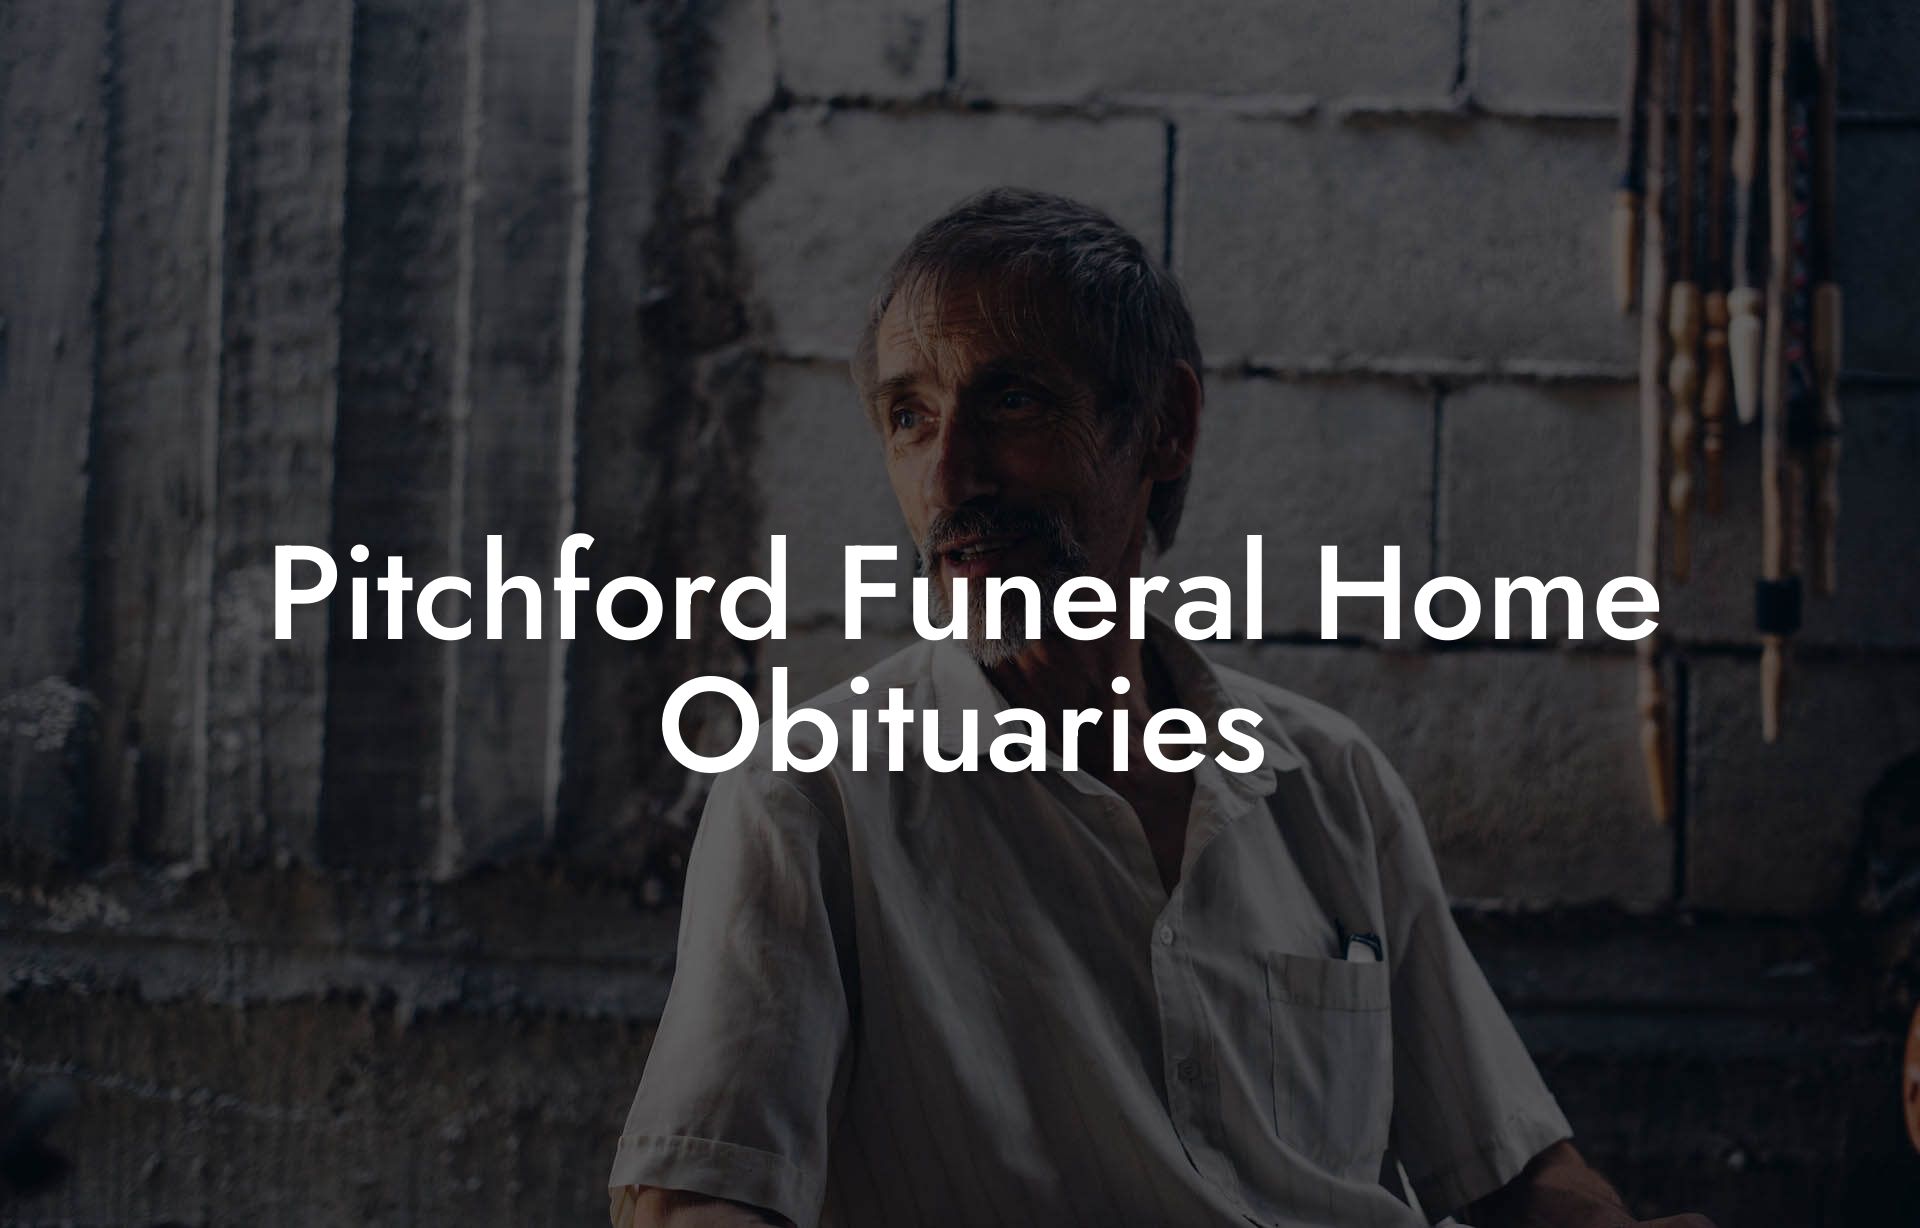 Pitchford Funeral Home Obituaries